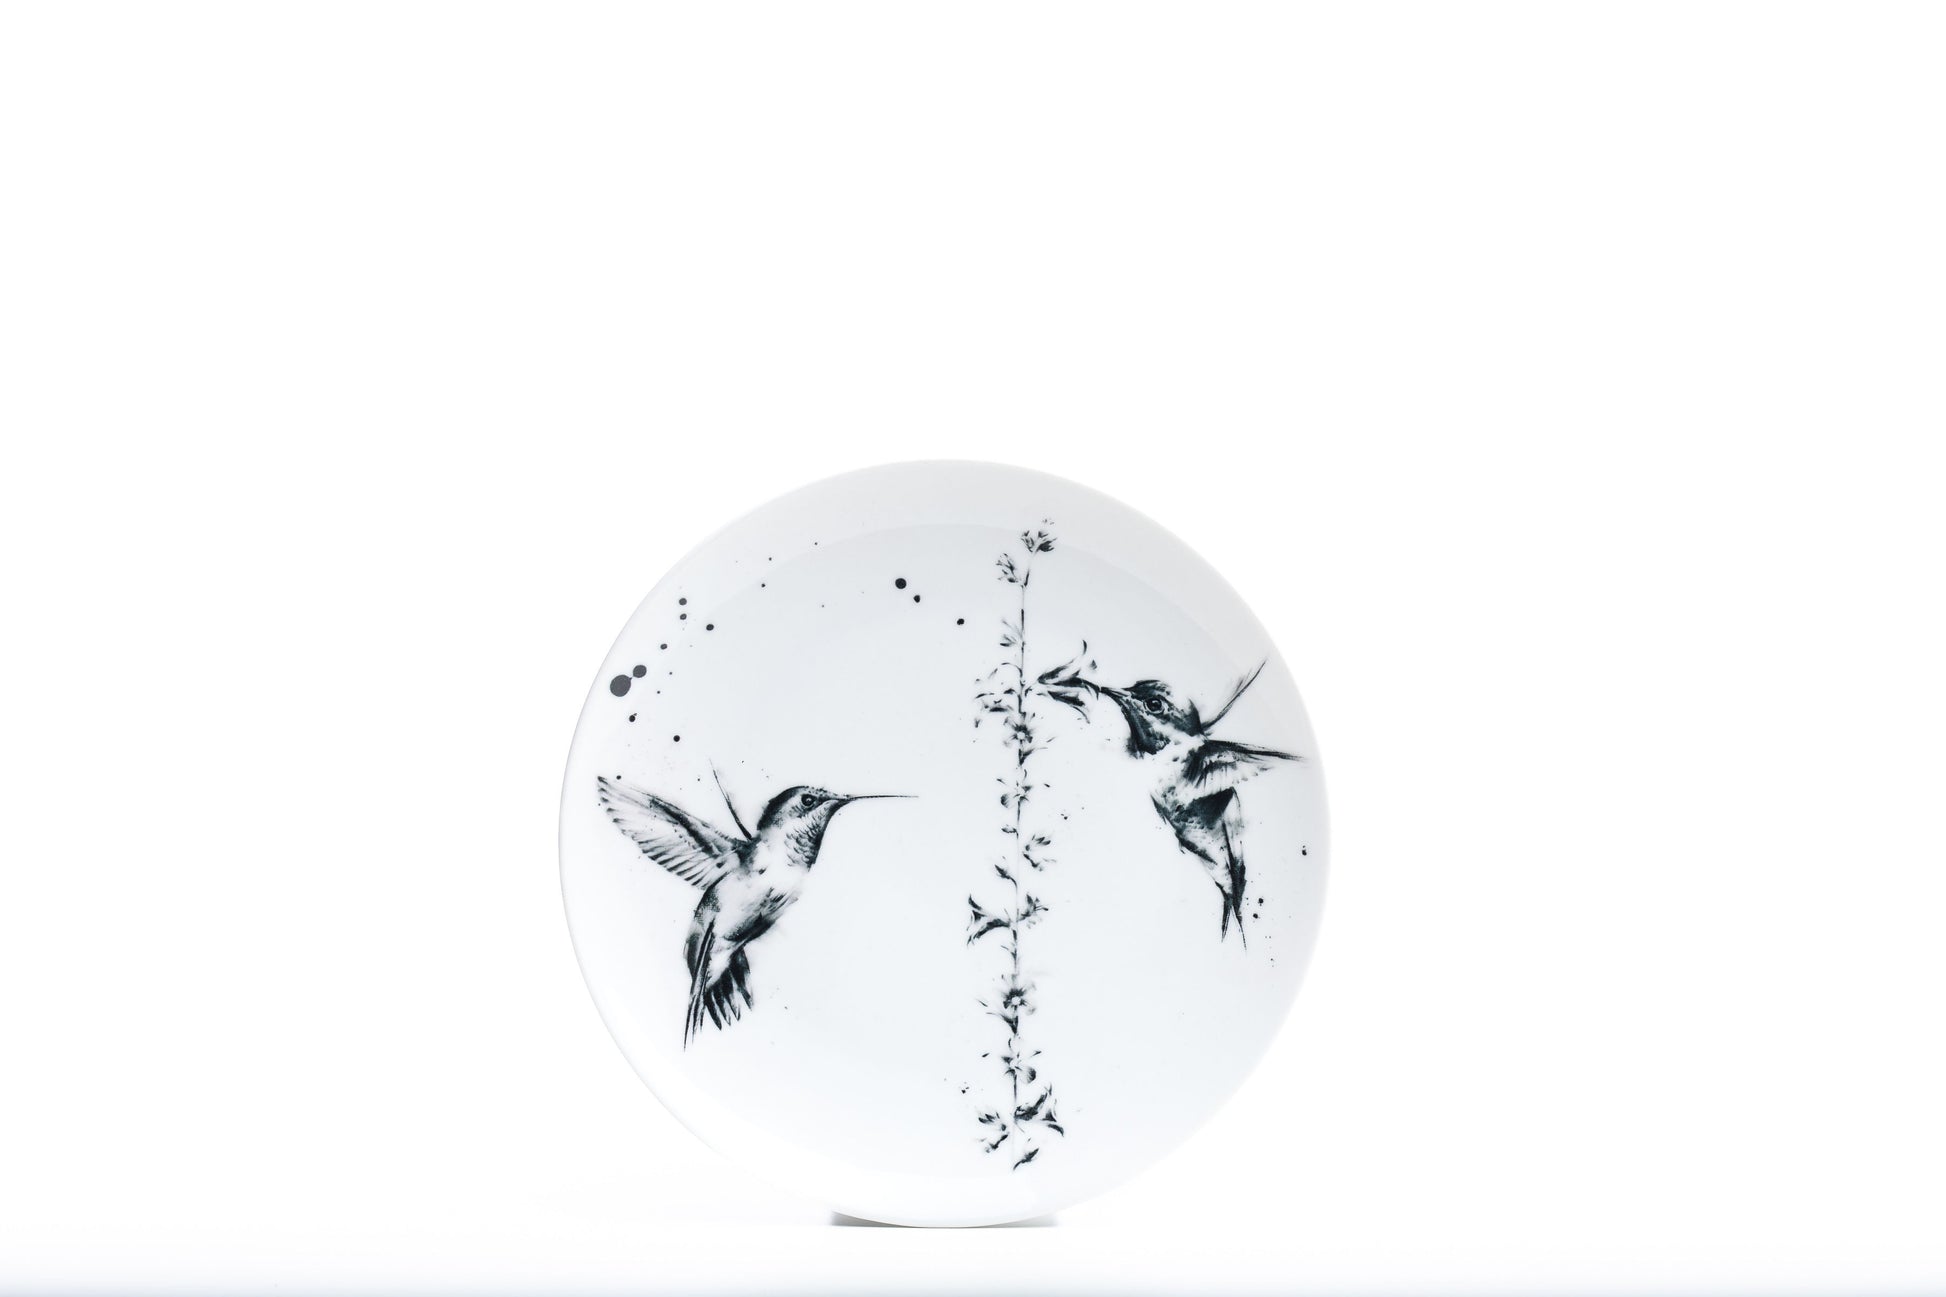 8" White coupe porcelain salad plate with two hummingbirds and a flower illustration and black ink splatter product photo on white background